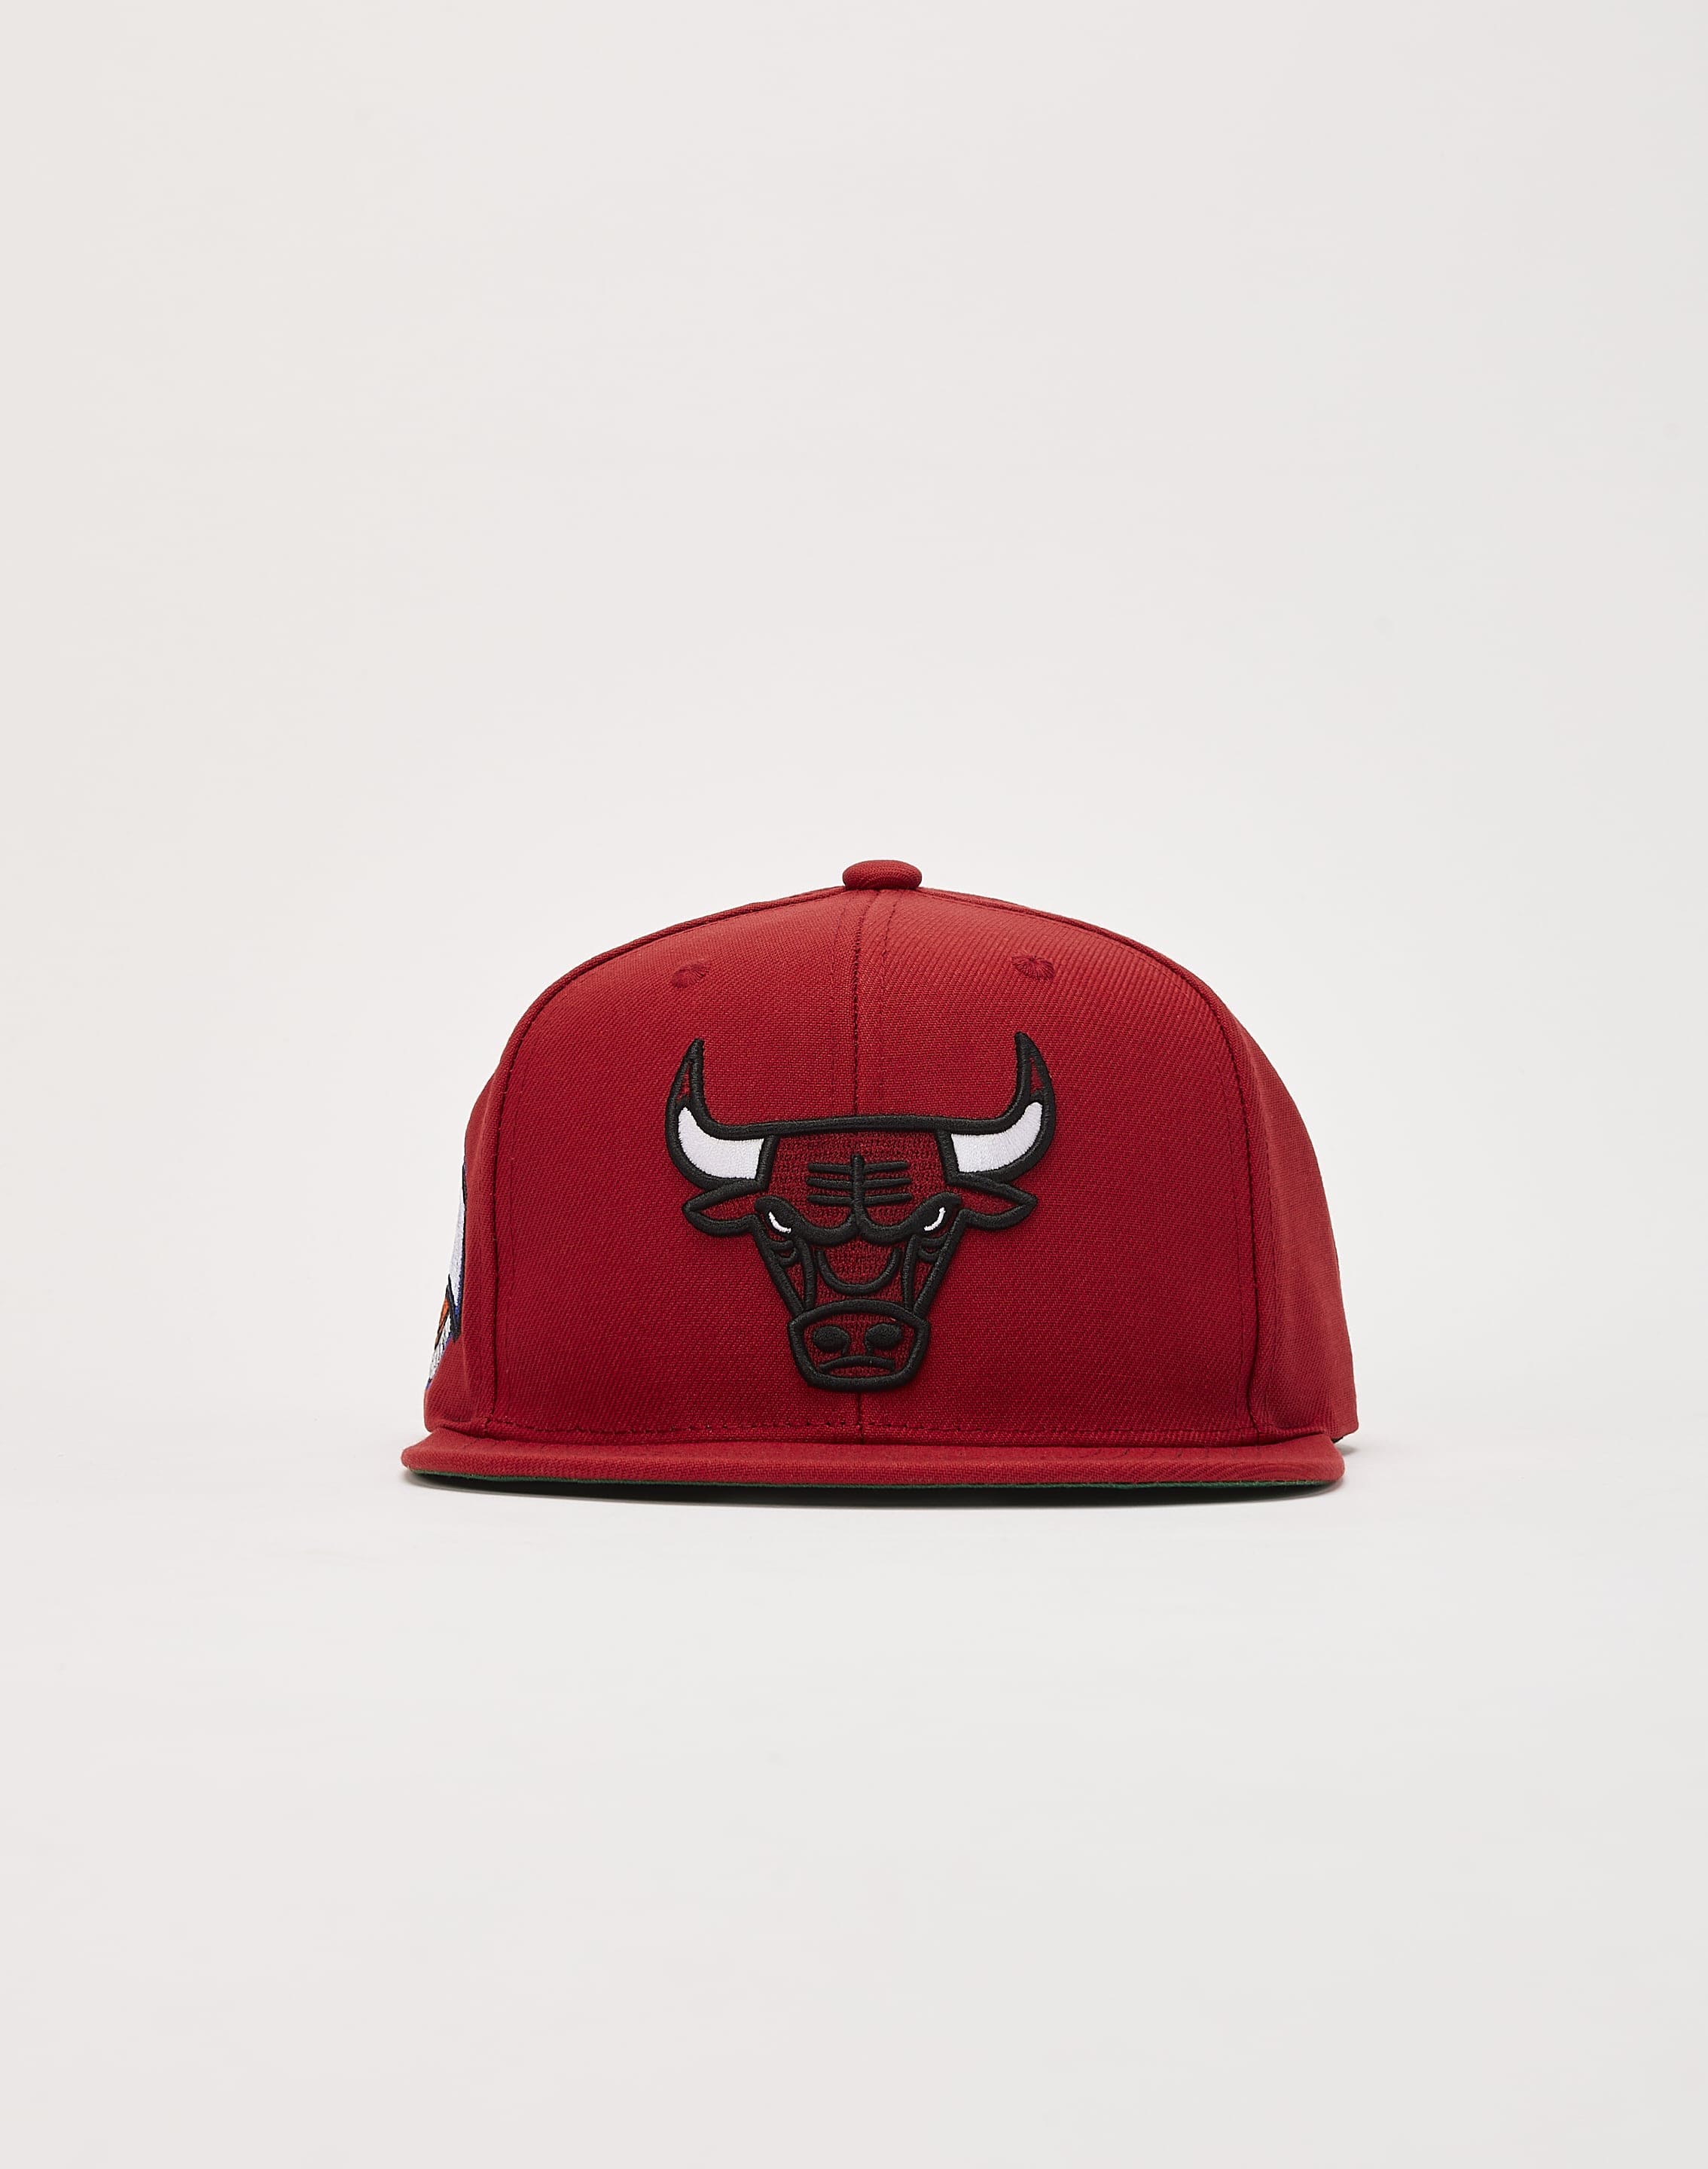 Mitchell & Ness - NBA Red fitted Cap - Chicago Bulls Northern Lights Cardinal Fitted @ Hatstore